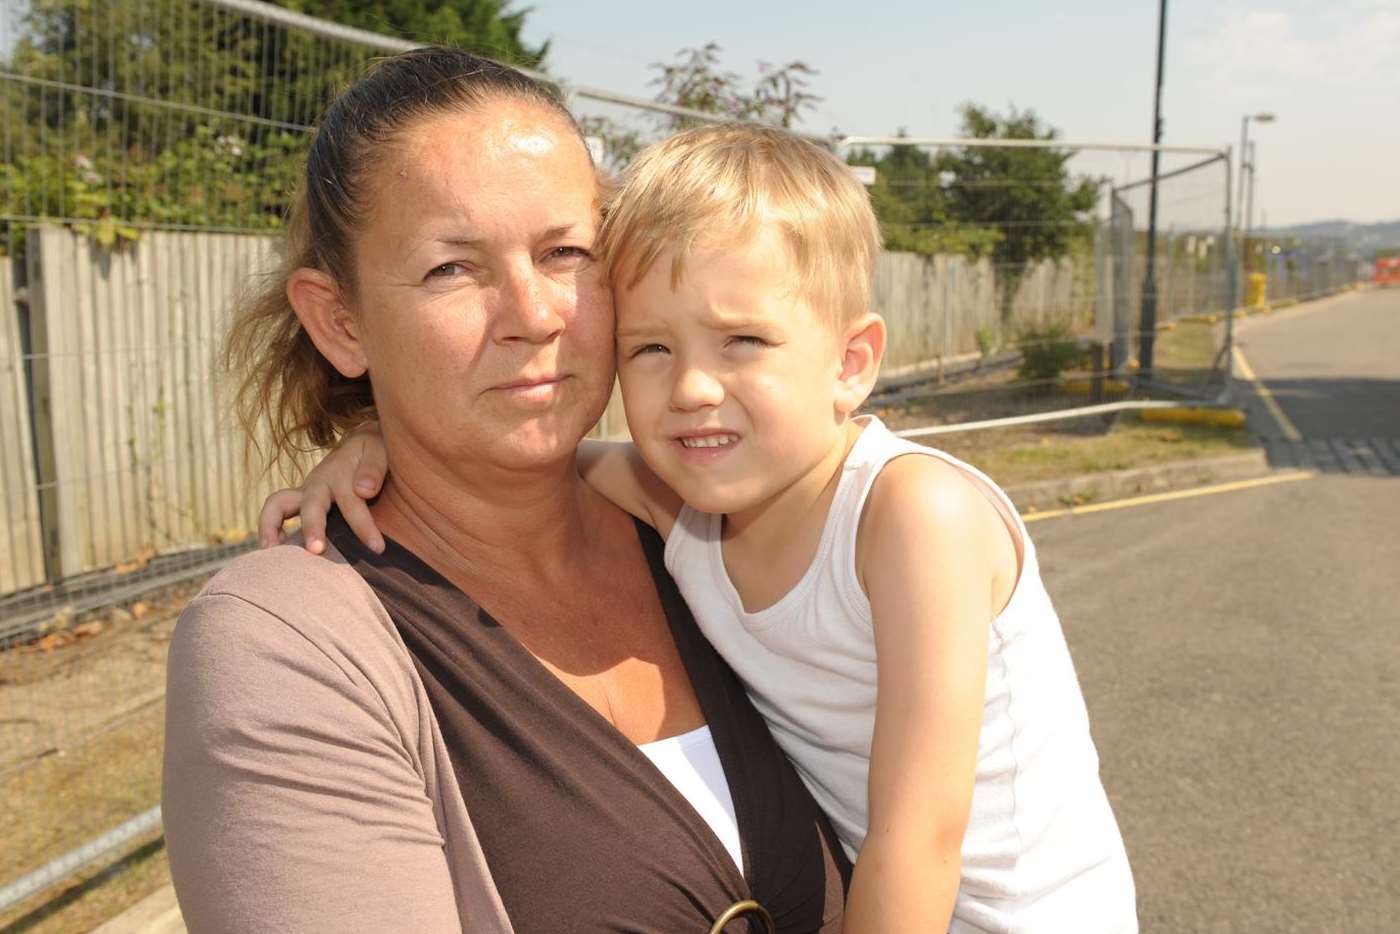 Strood mother Susan Dray and son Lucas by the railway track